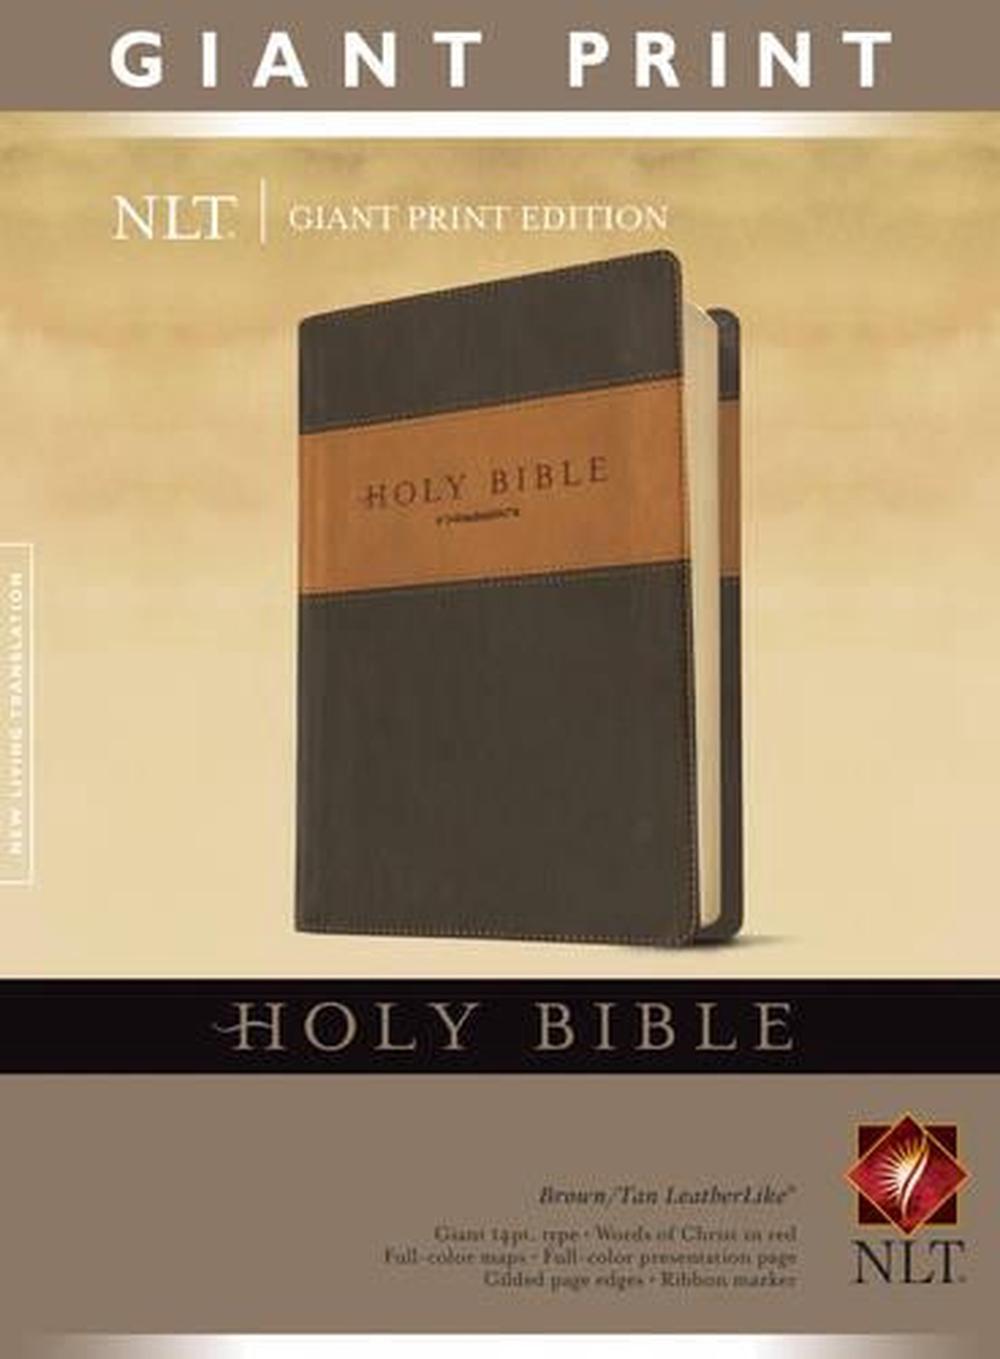 Amazon Spanish Bible Large Print The Best-selling Catholic Bible On
Amazon Is Now Available In Spanish